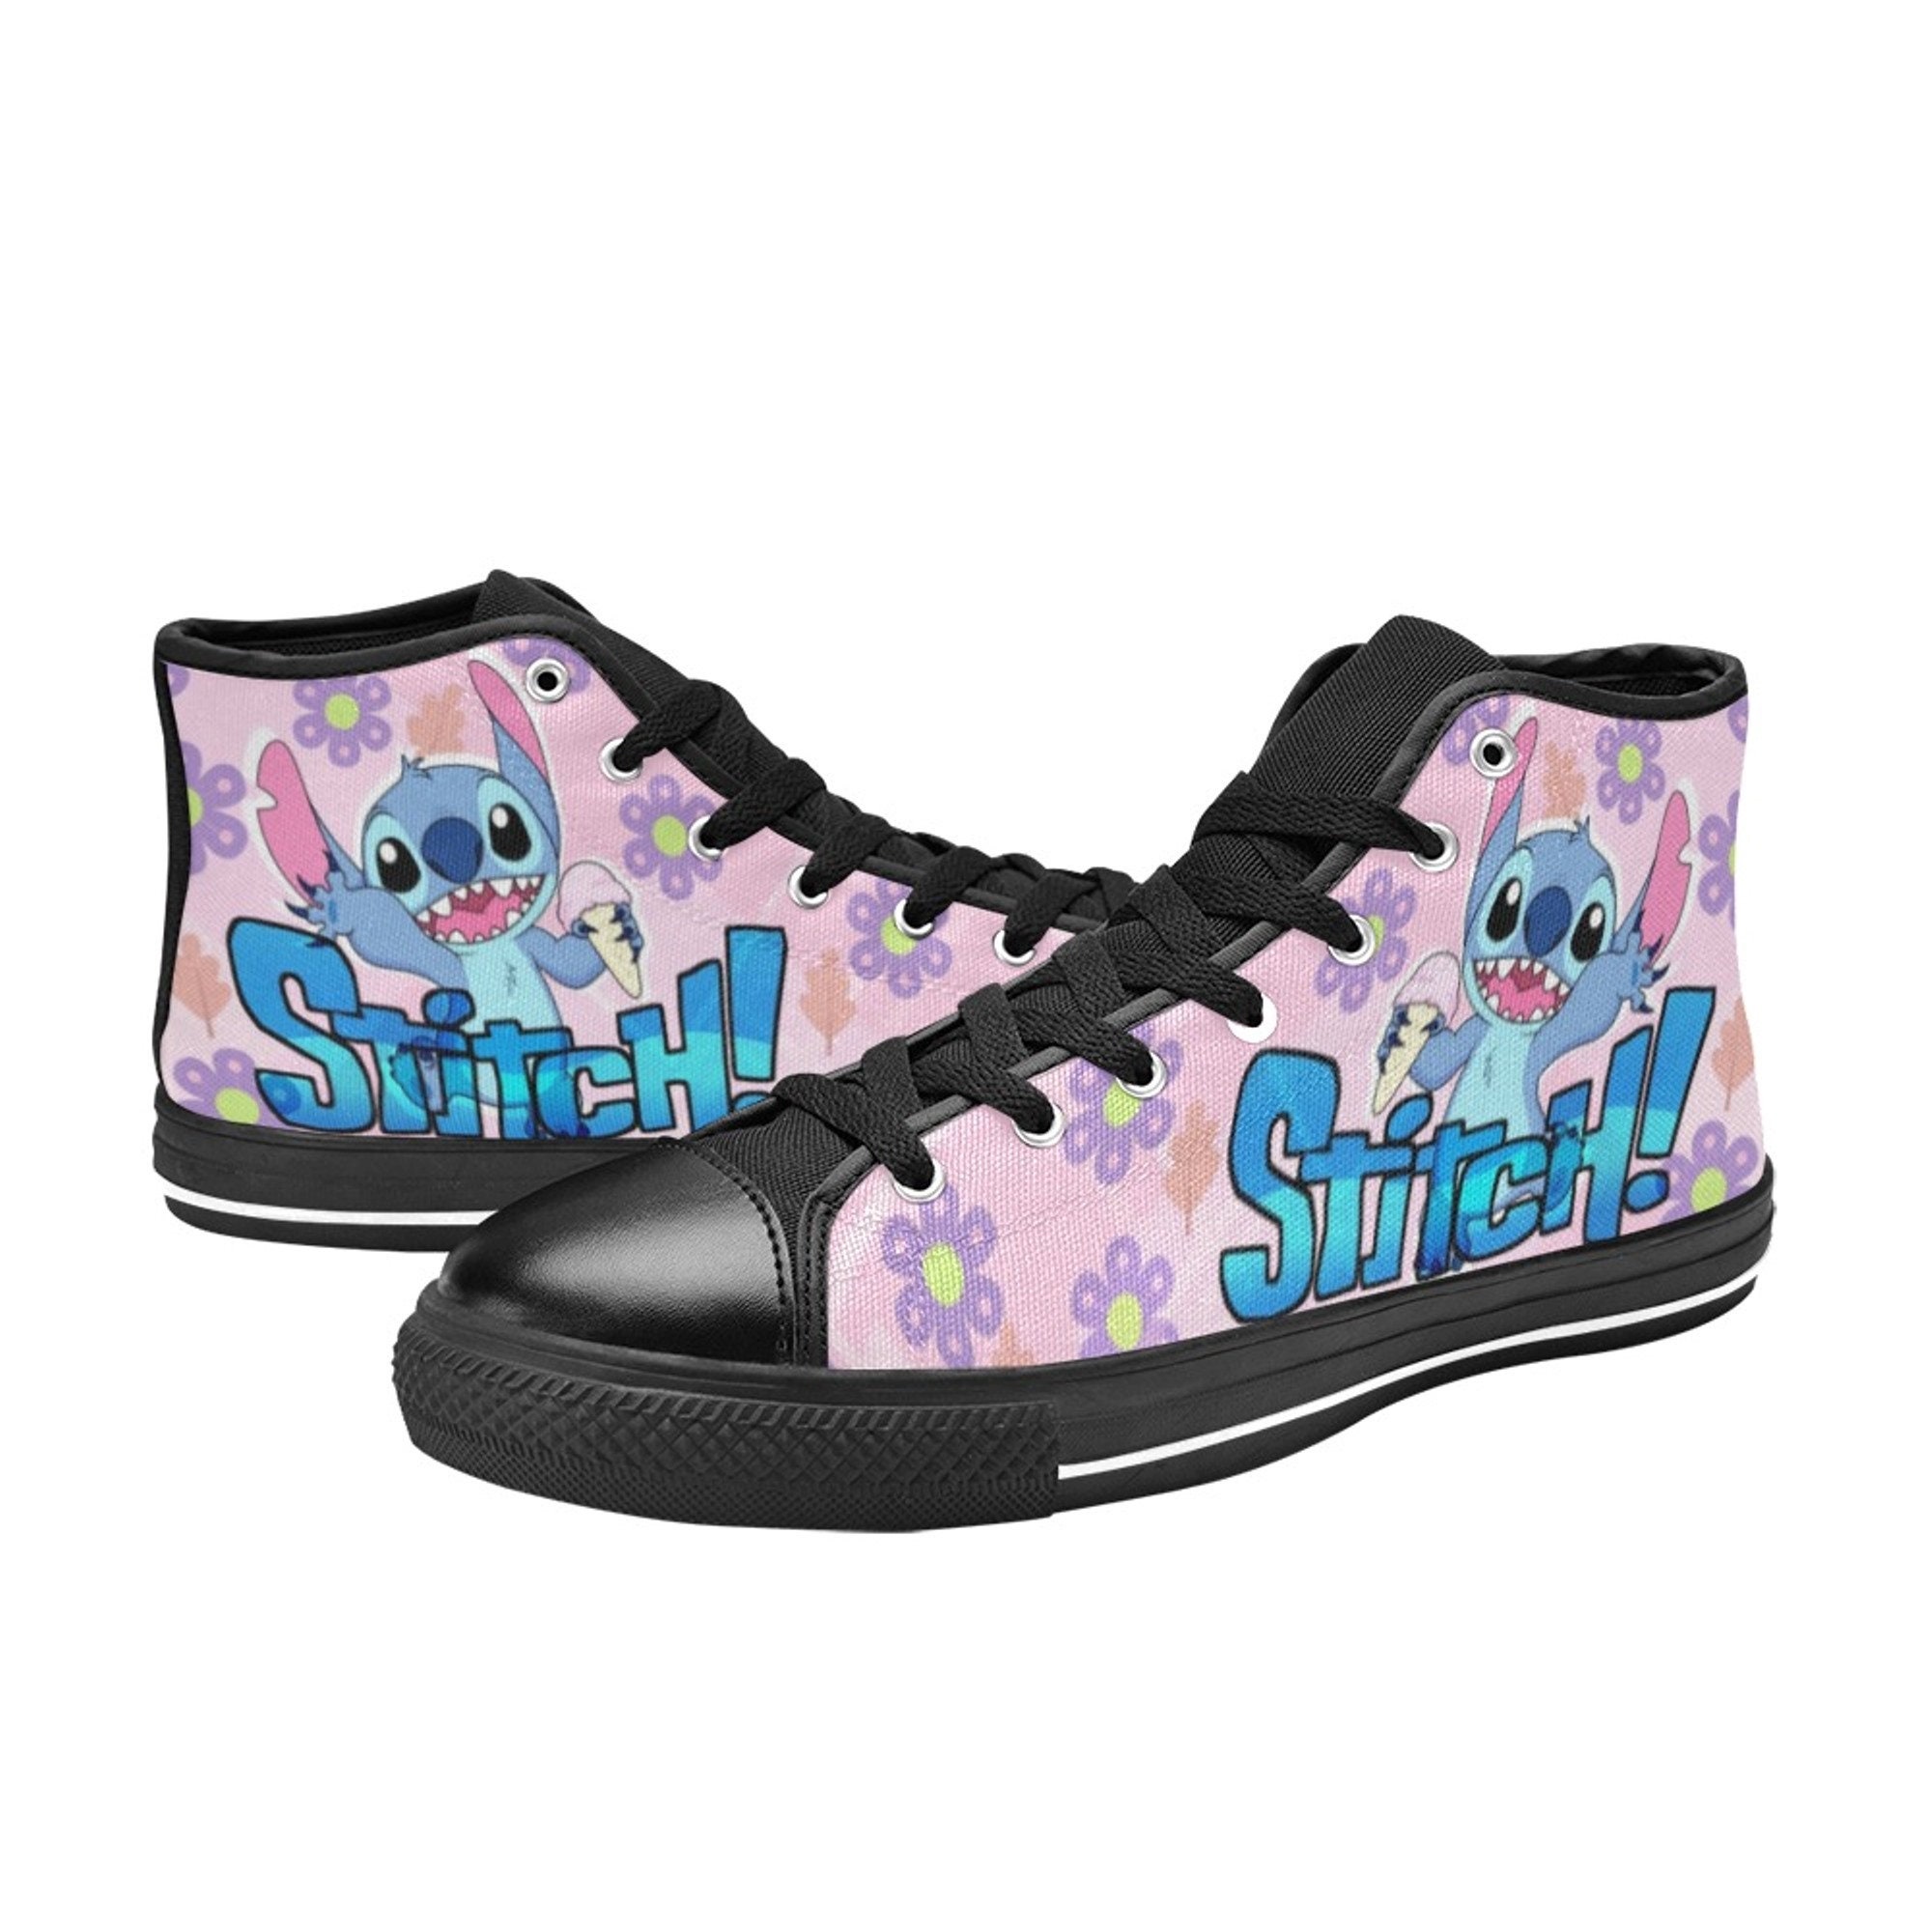 Stitch Custom High Top Sneakers for Fans, Adults, Kids, Men and Women